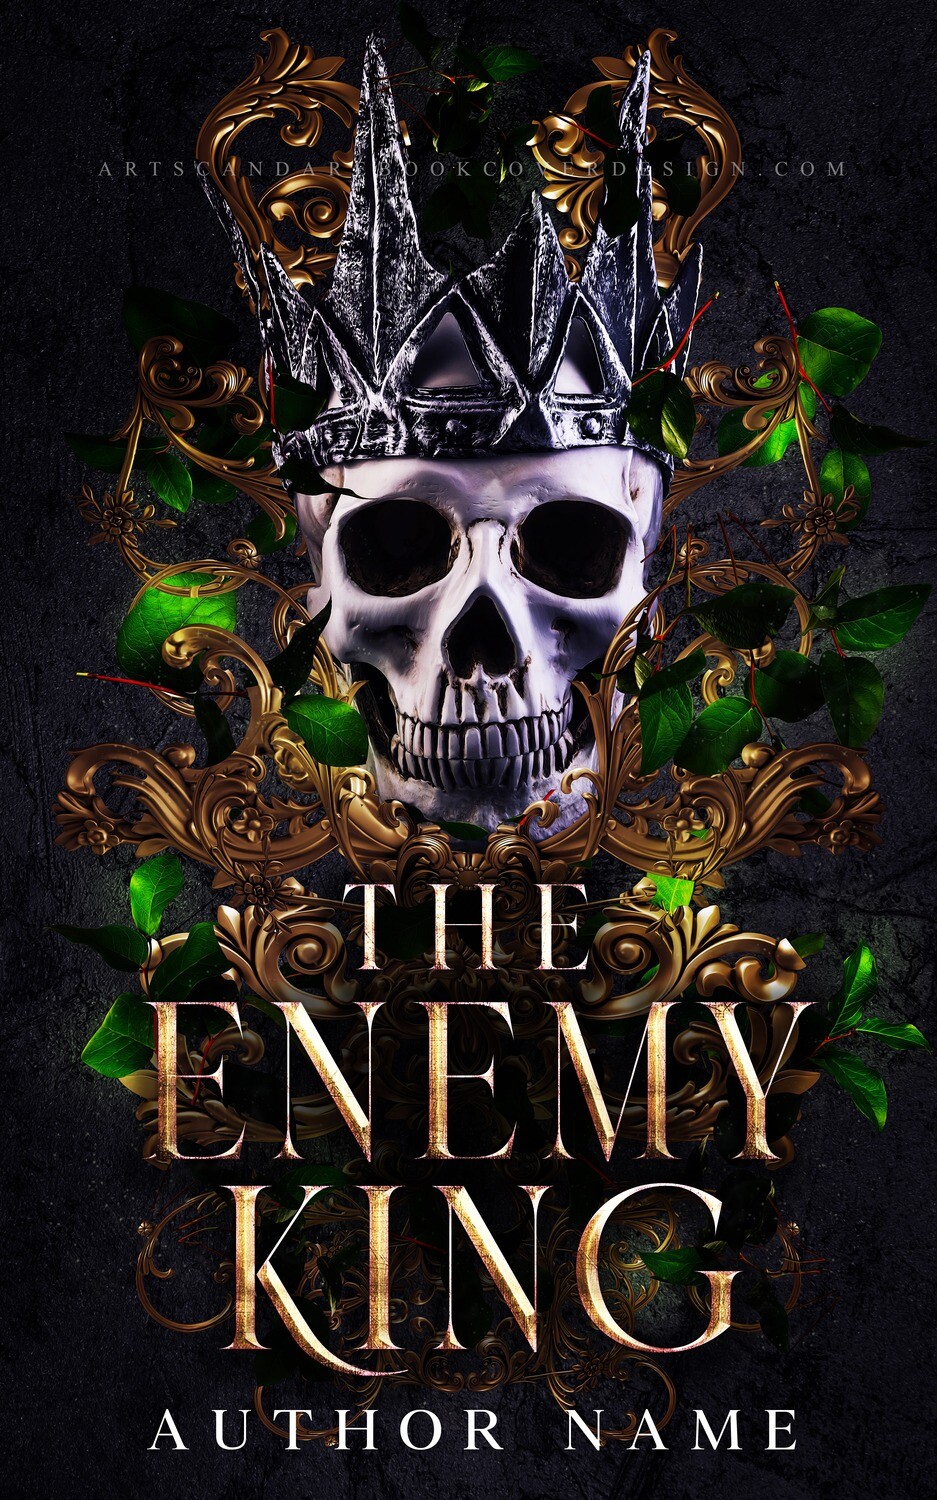 THE ENEMY KING